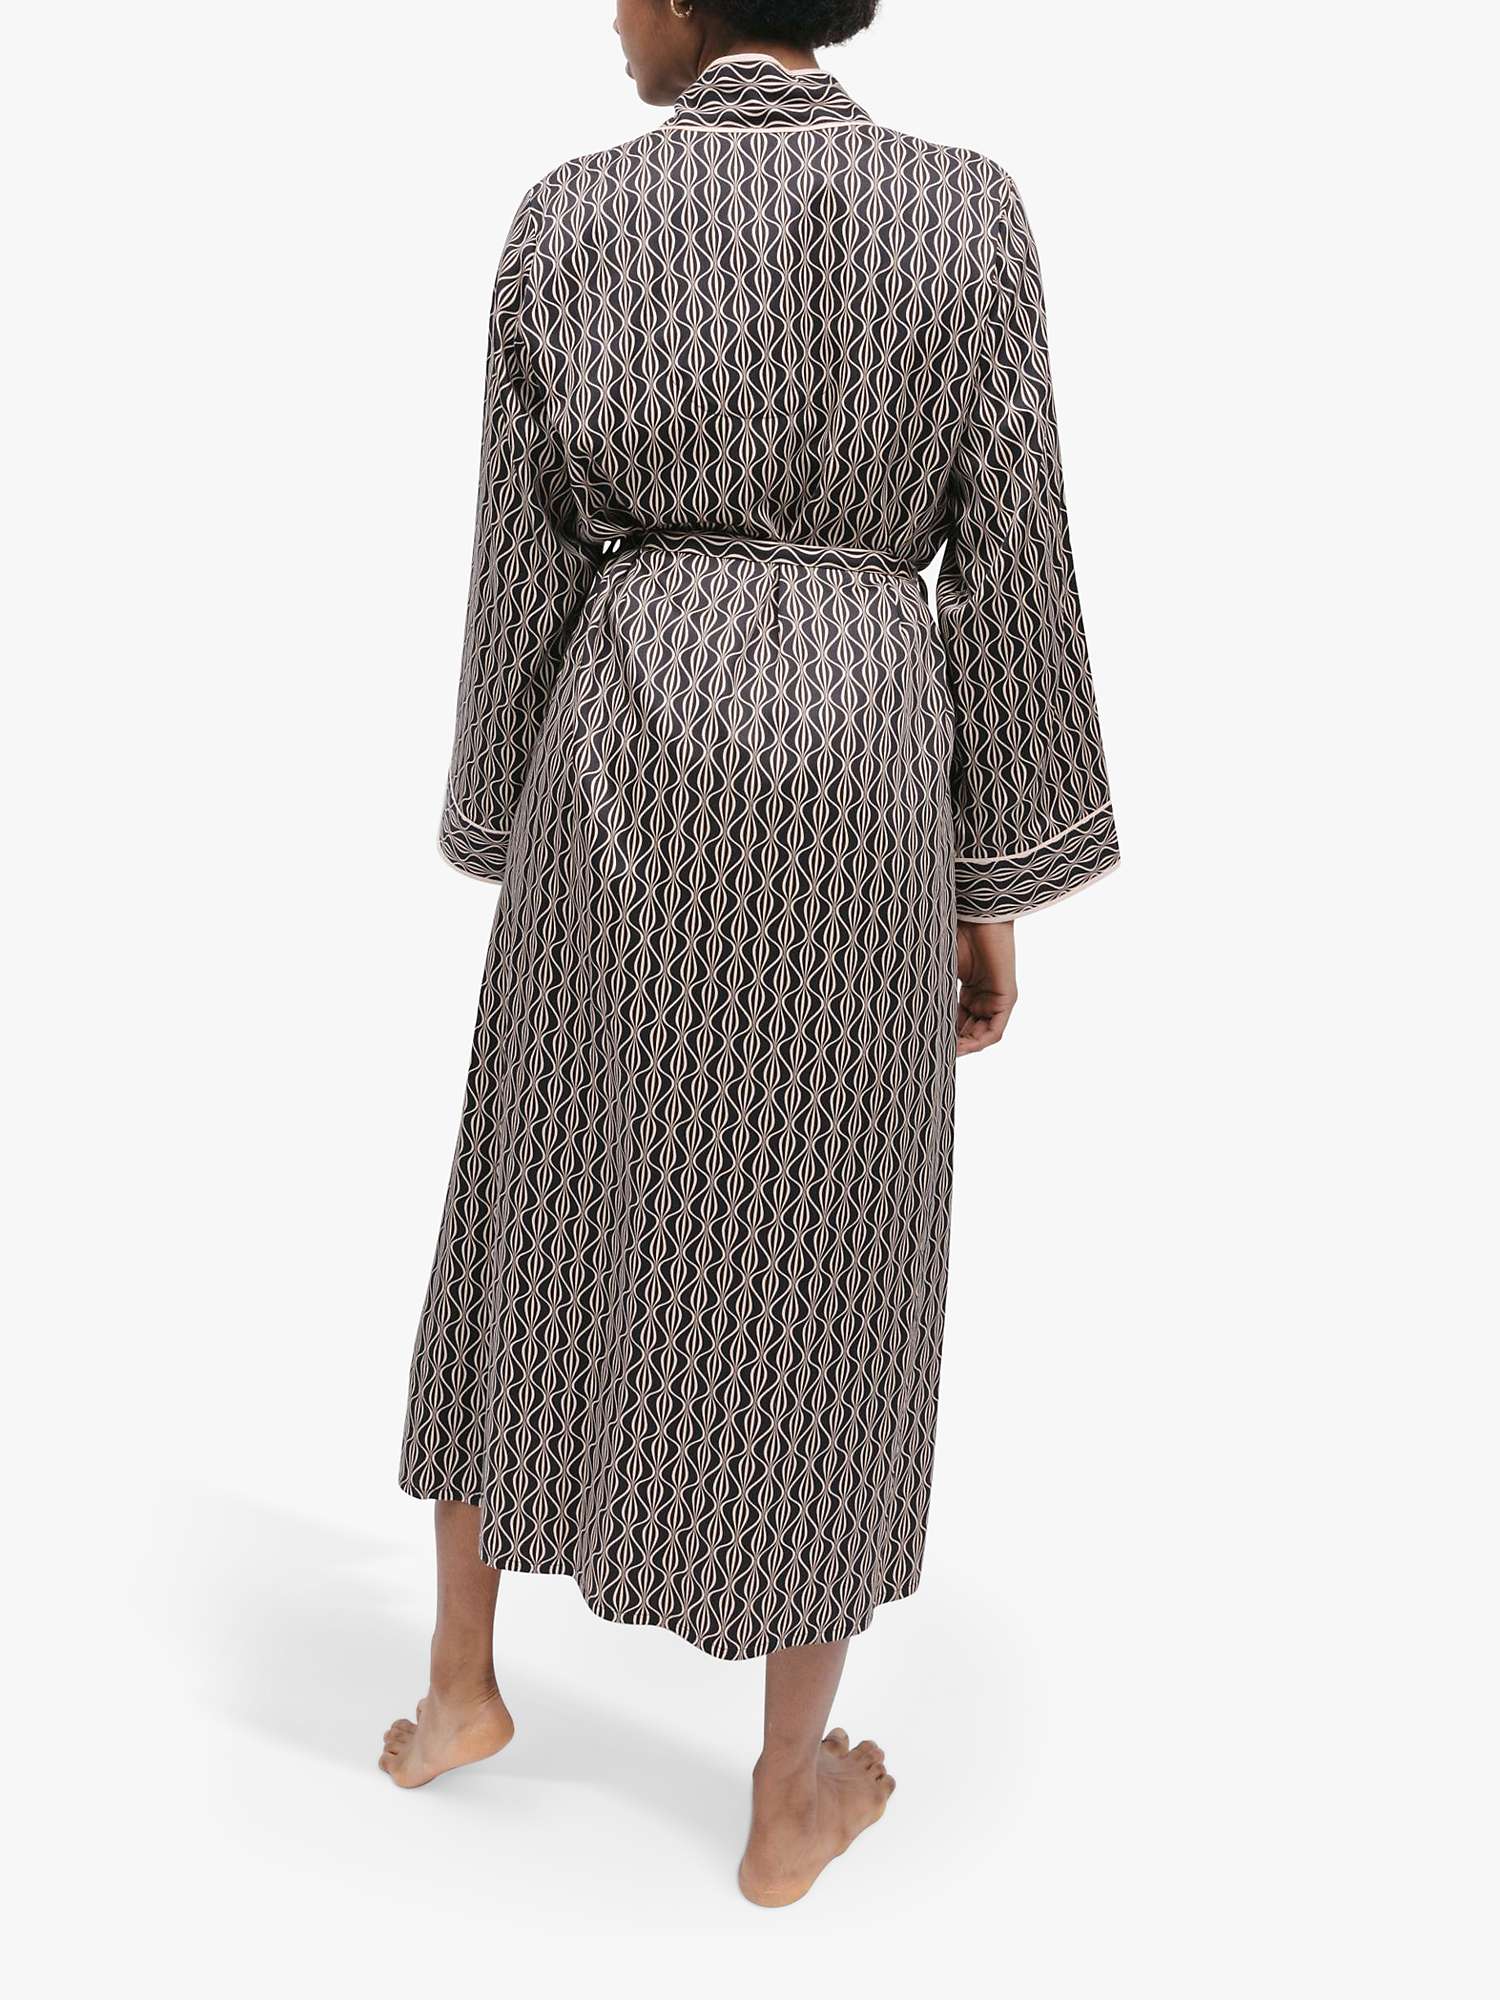 Buy Fable & Eve Brixton Geometric Print Long Dressing Gown, Black Online at johnlewis.com